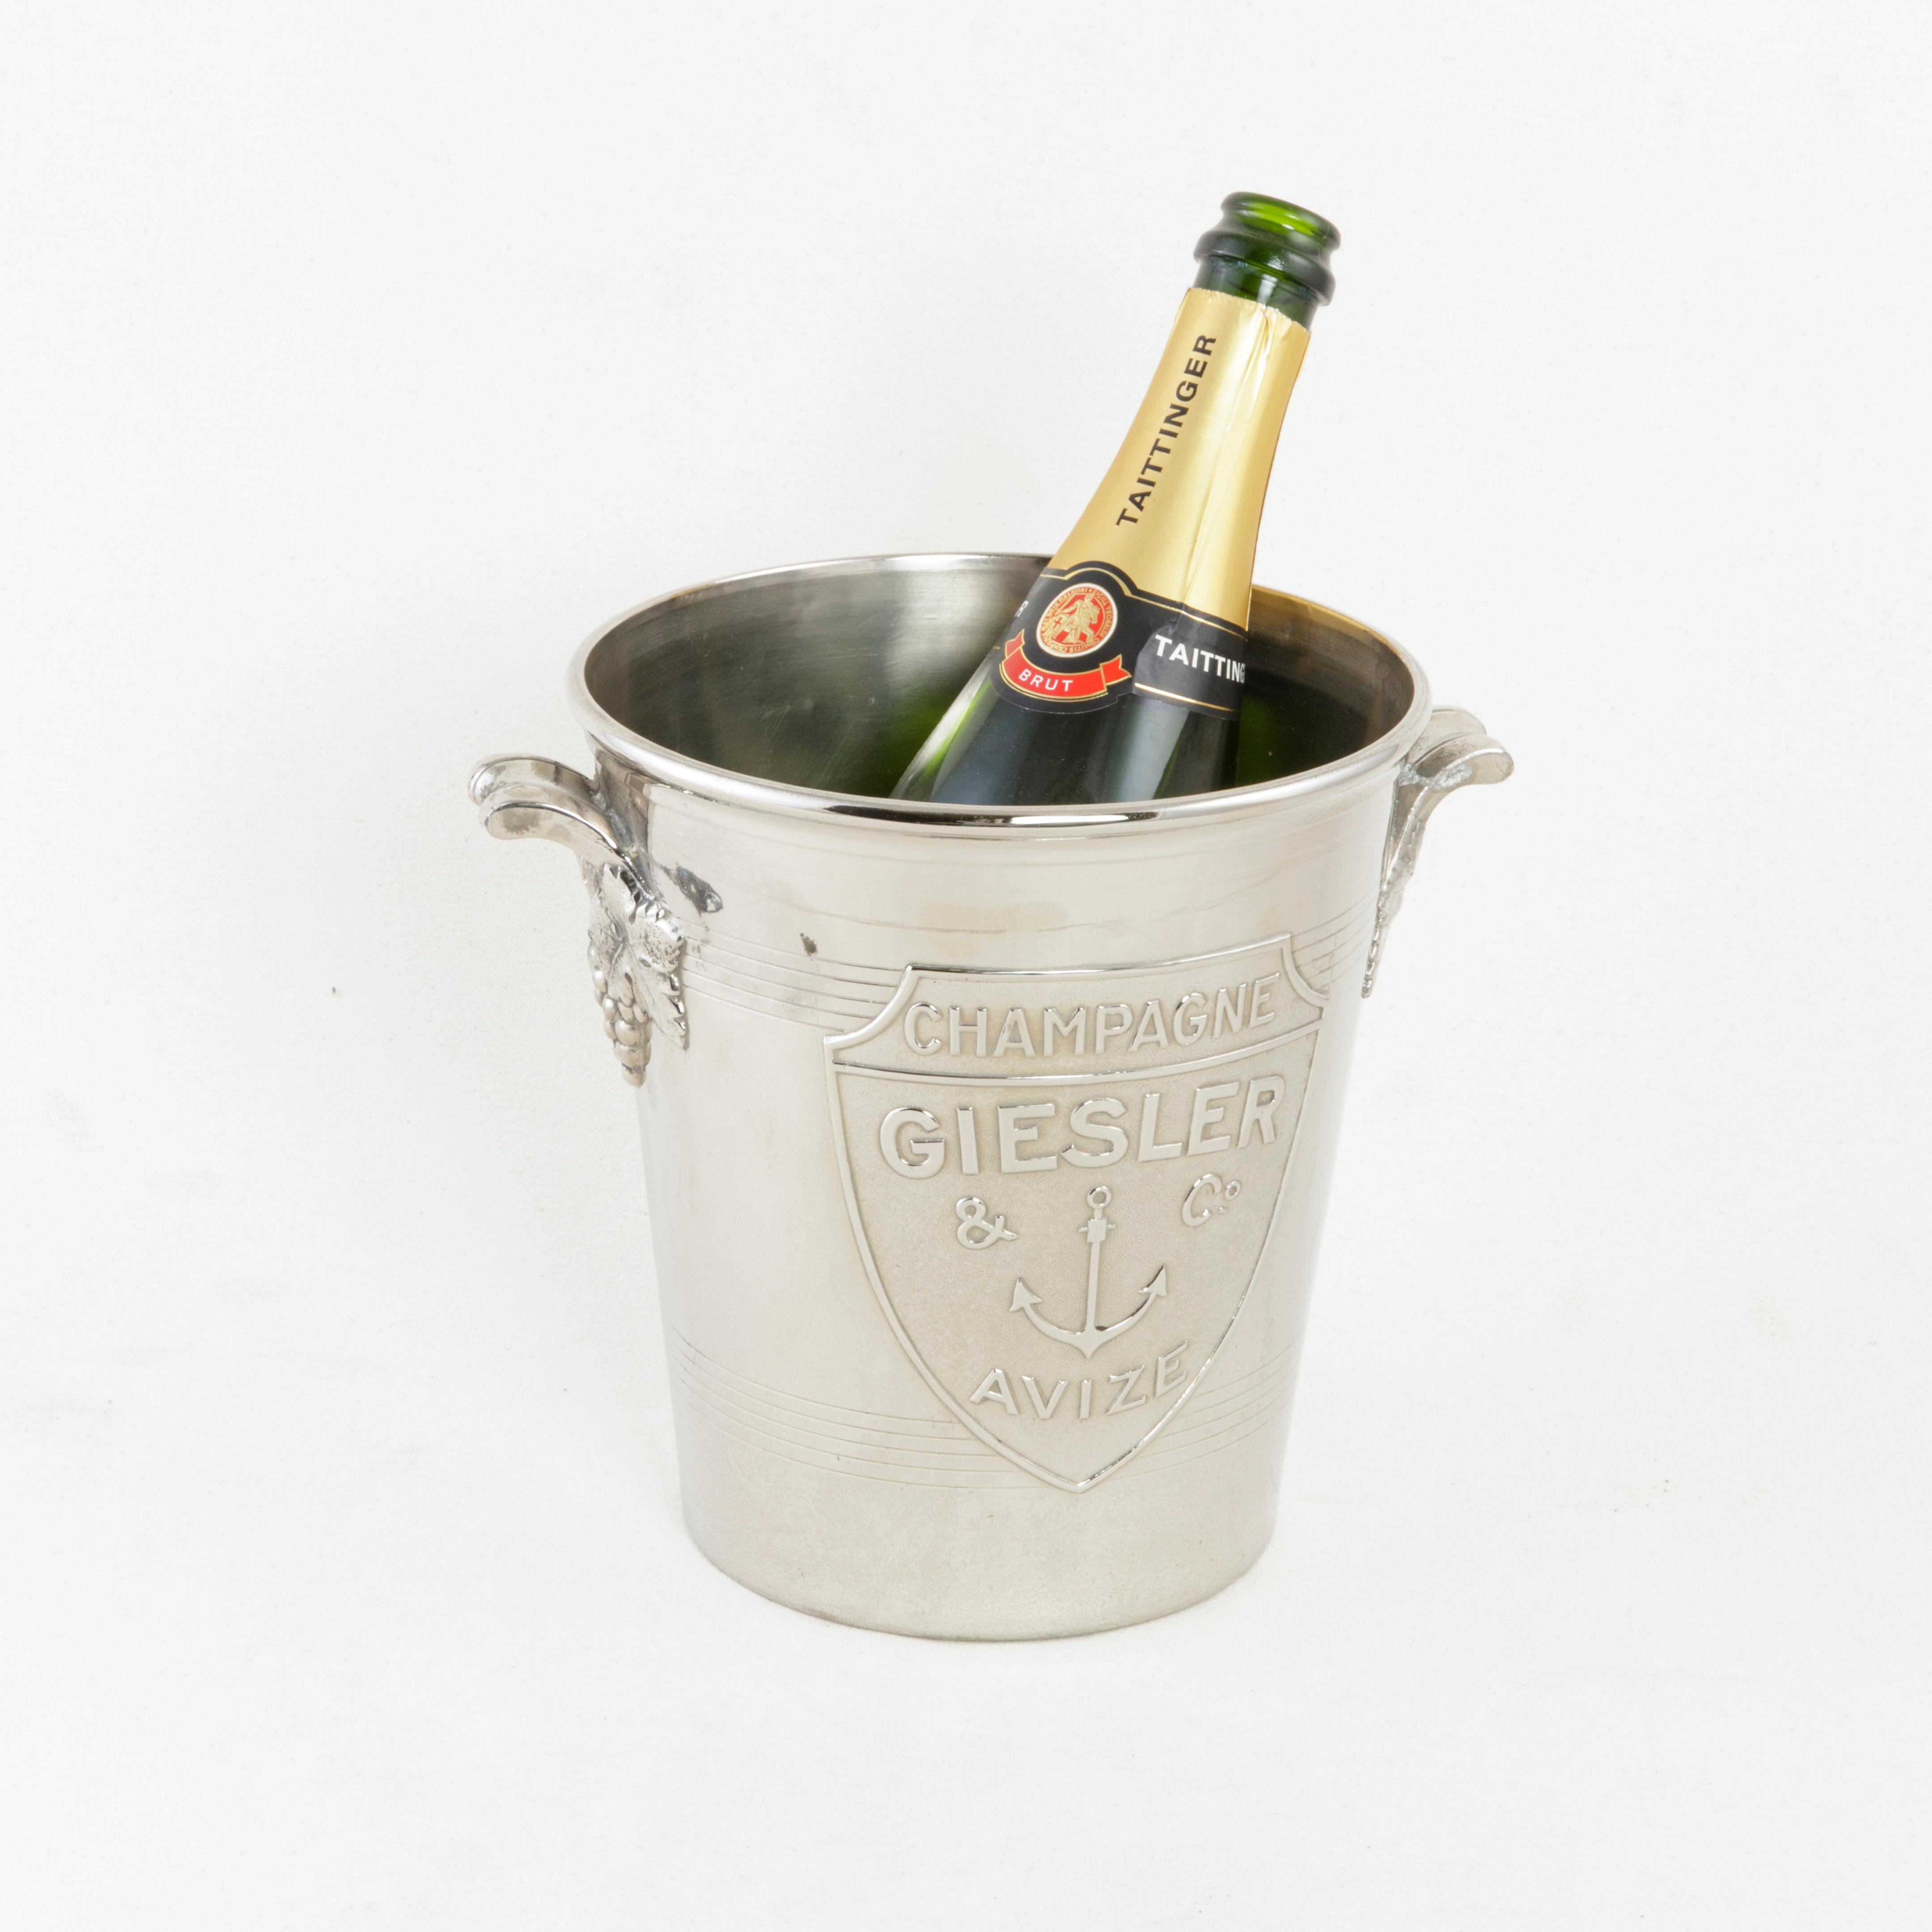 This mid-20th century French silver plate champagne bucket features a shield on one side with the name of the champagne producer, Giesler & Co and the name of its town of origin Avize below. At the center of the shield is an anchor. The Giesler